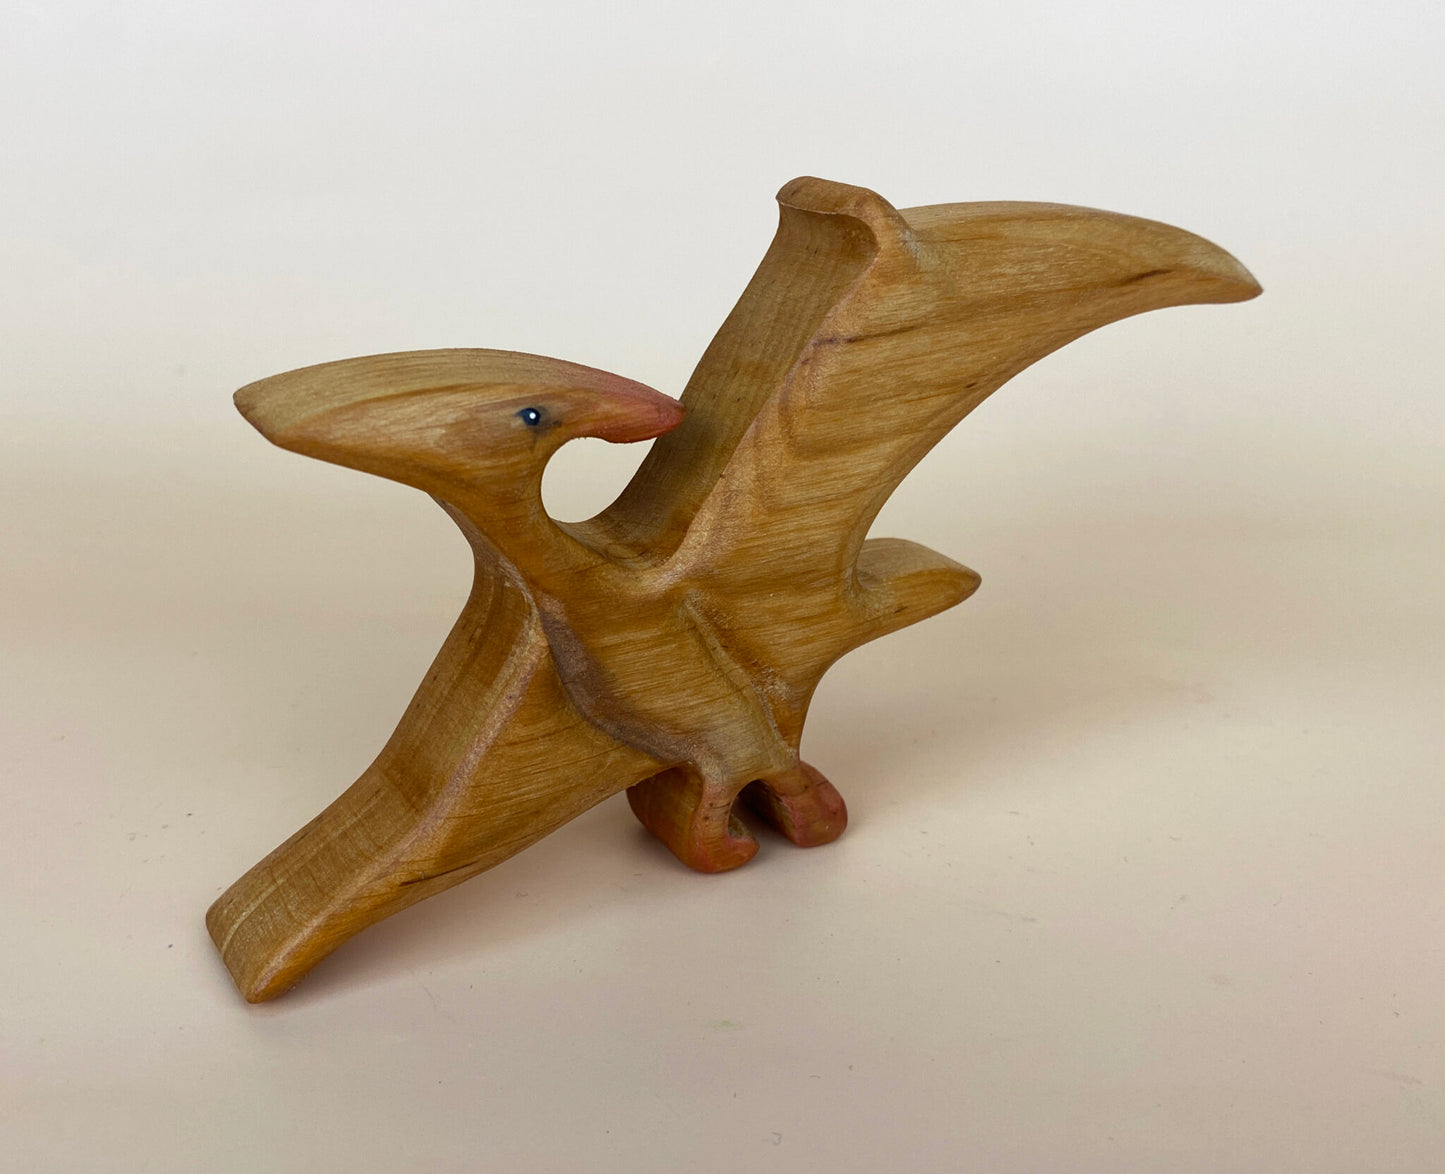 Pteranodon wooden dinosaur toy with spreaded wings